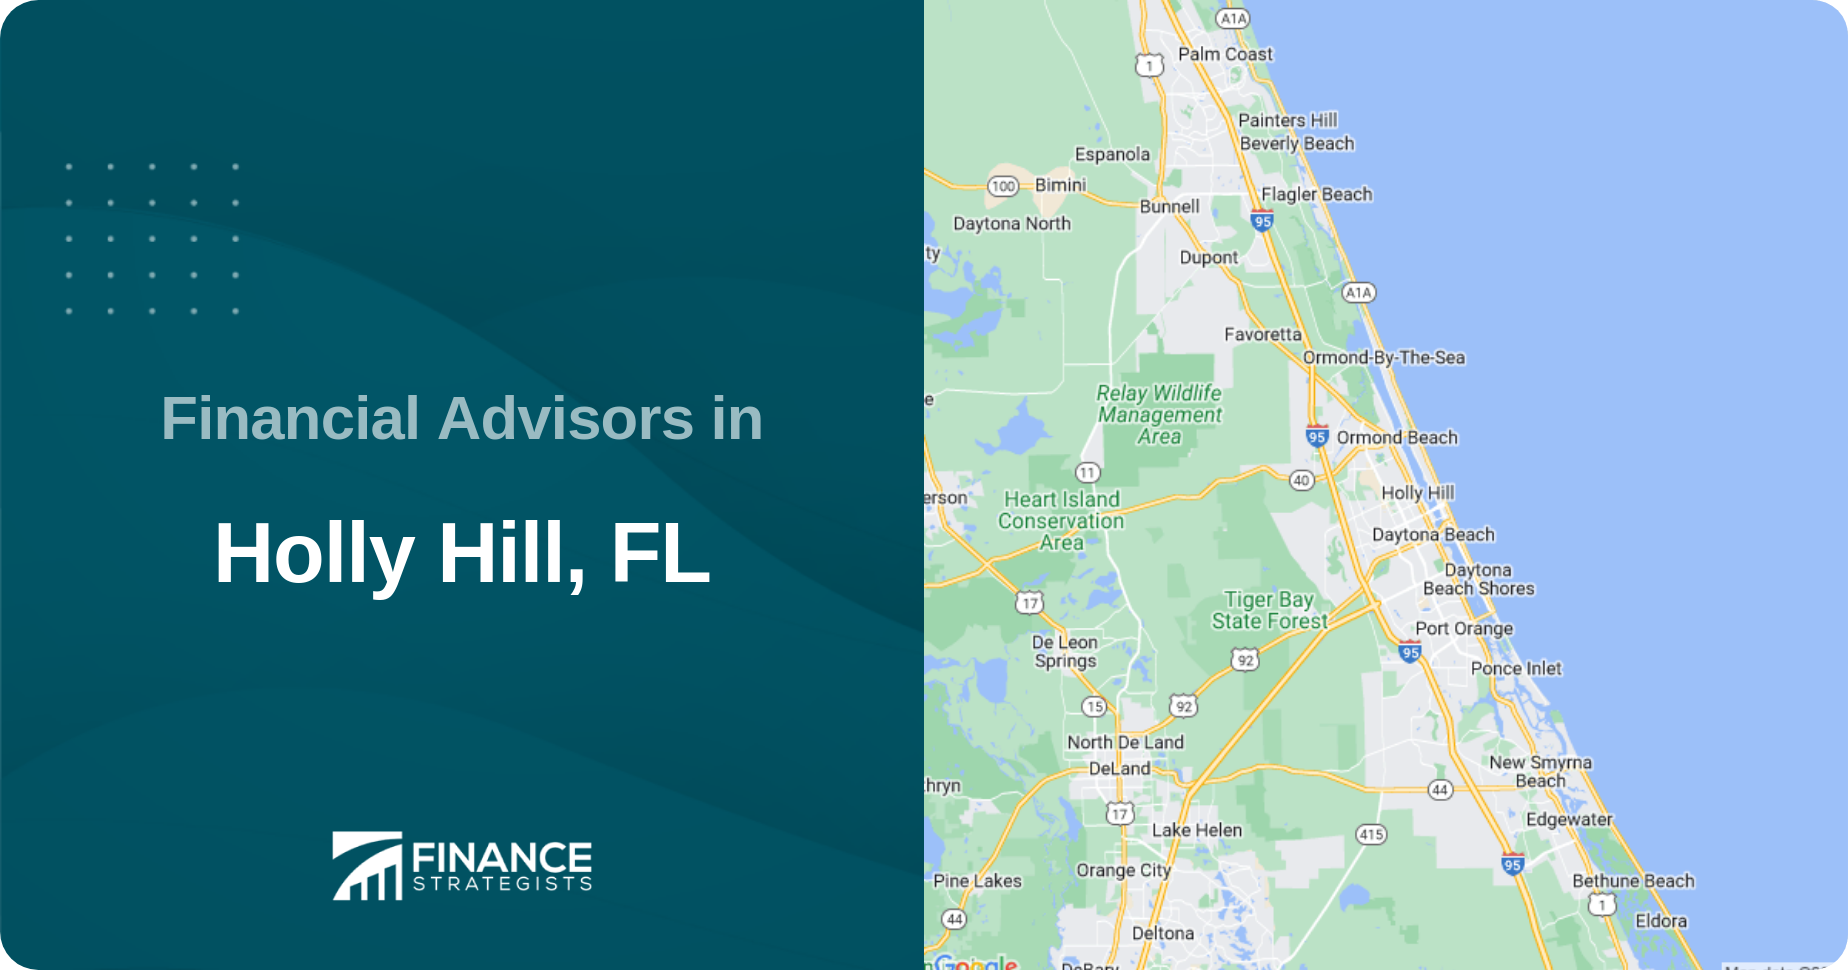 Financial Advisors in Holly Hill, FL